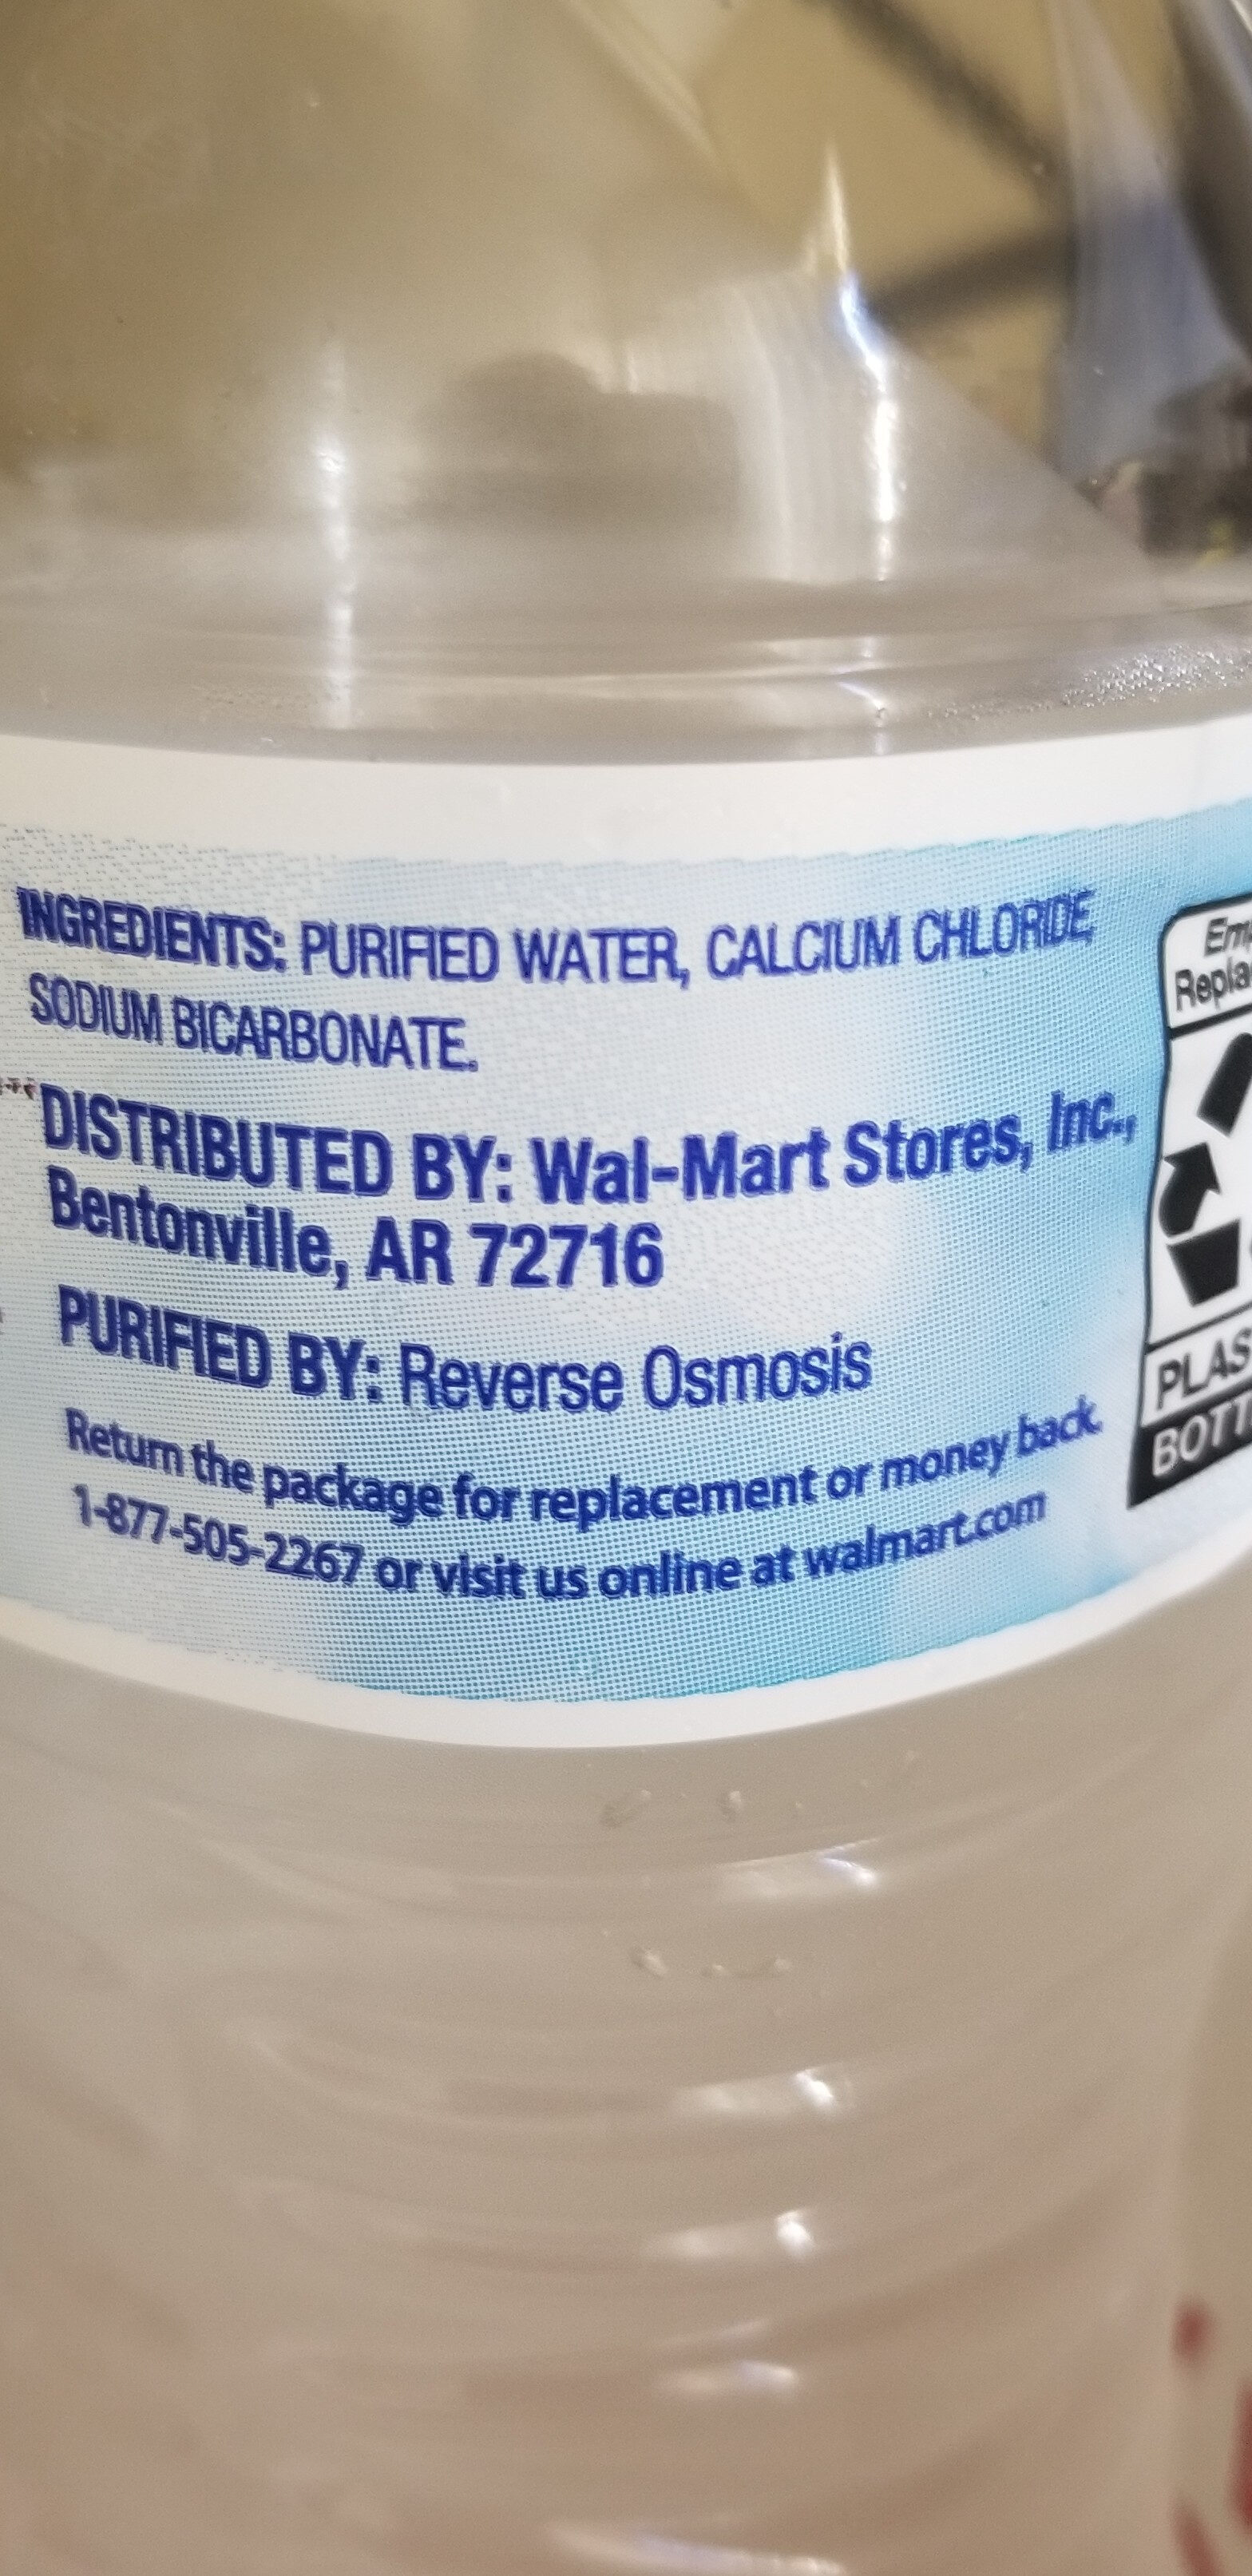 Great value, purified drinking water - Ingredients